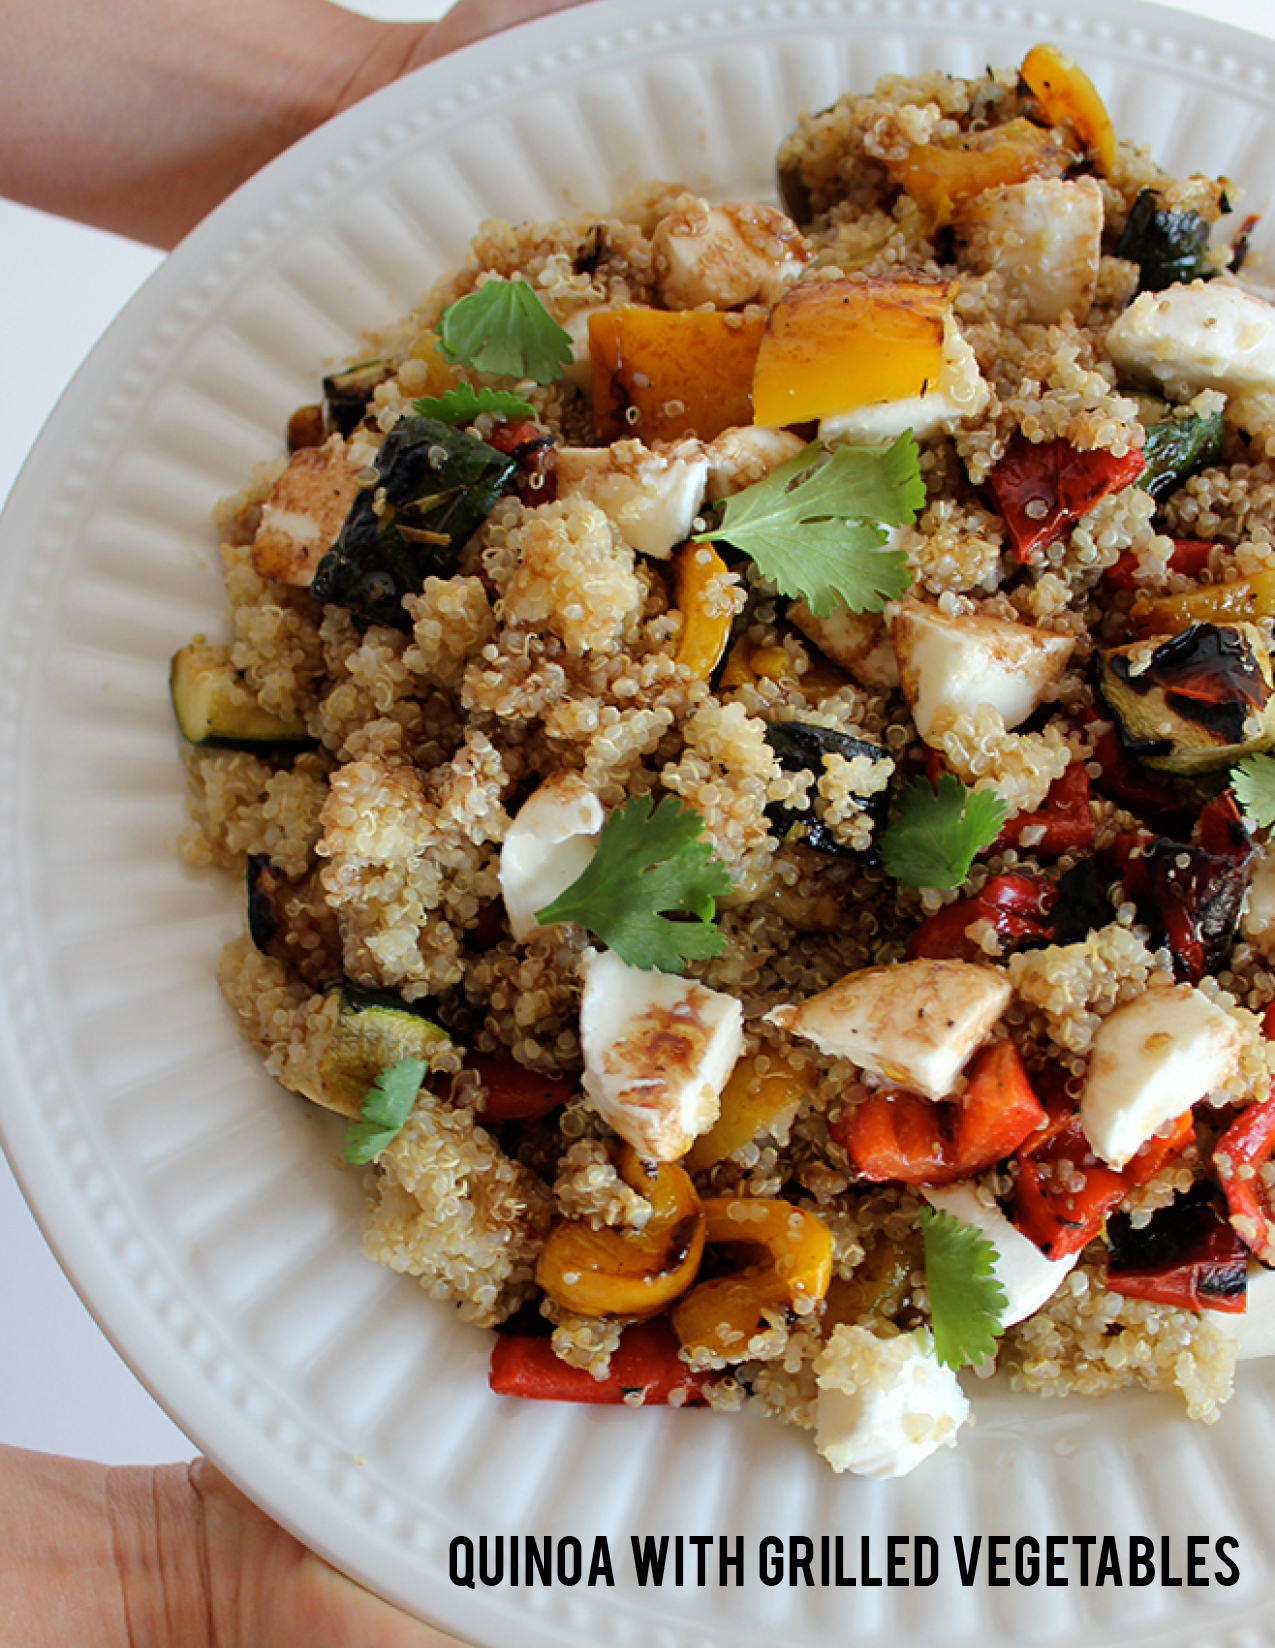 Quinoa with grilled vegetables